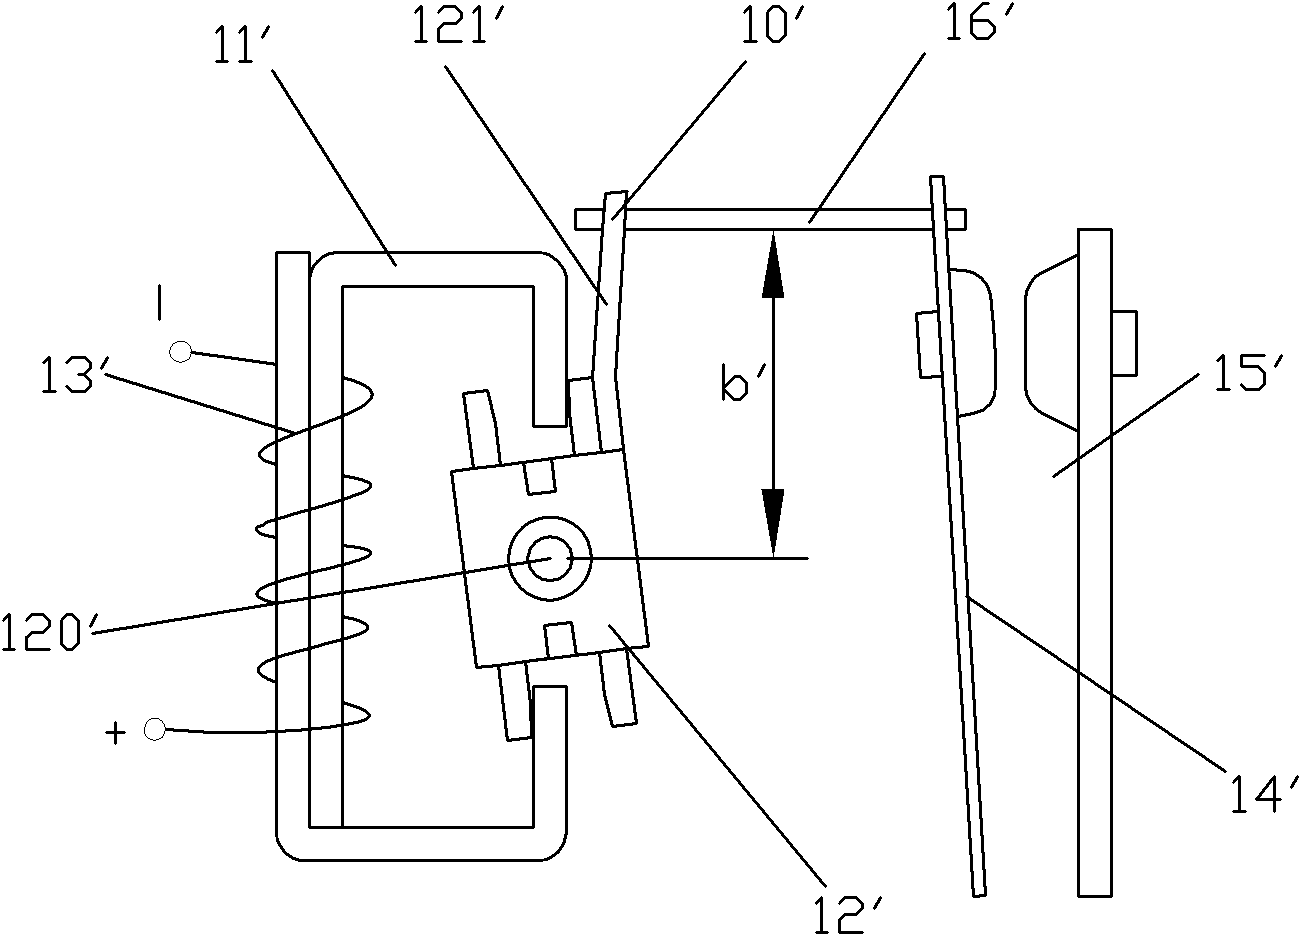 Magnetic latching relay with symmetrical transmission structure